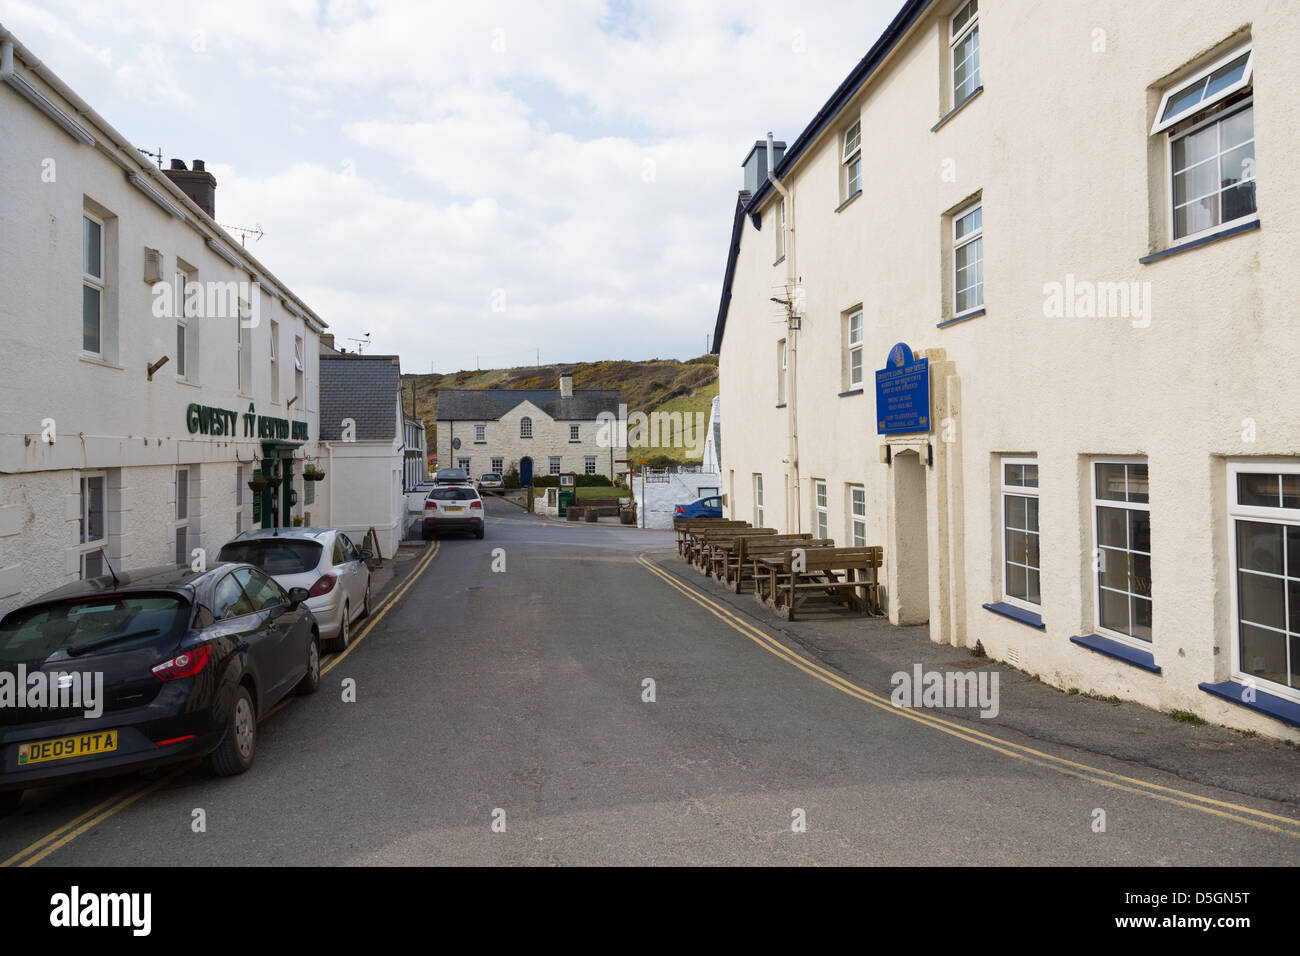 The tiny village of Aberdaron on the Llŷn Peninsula in north Wales. Stock Photo